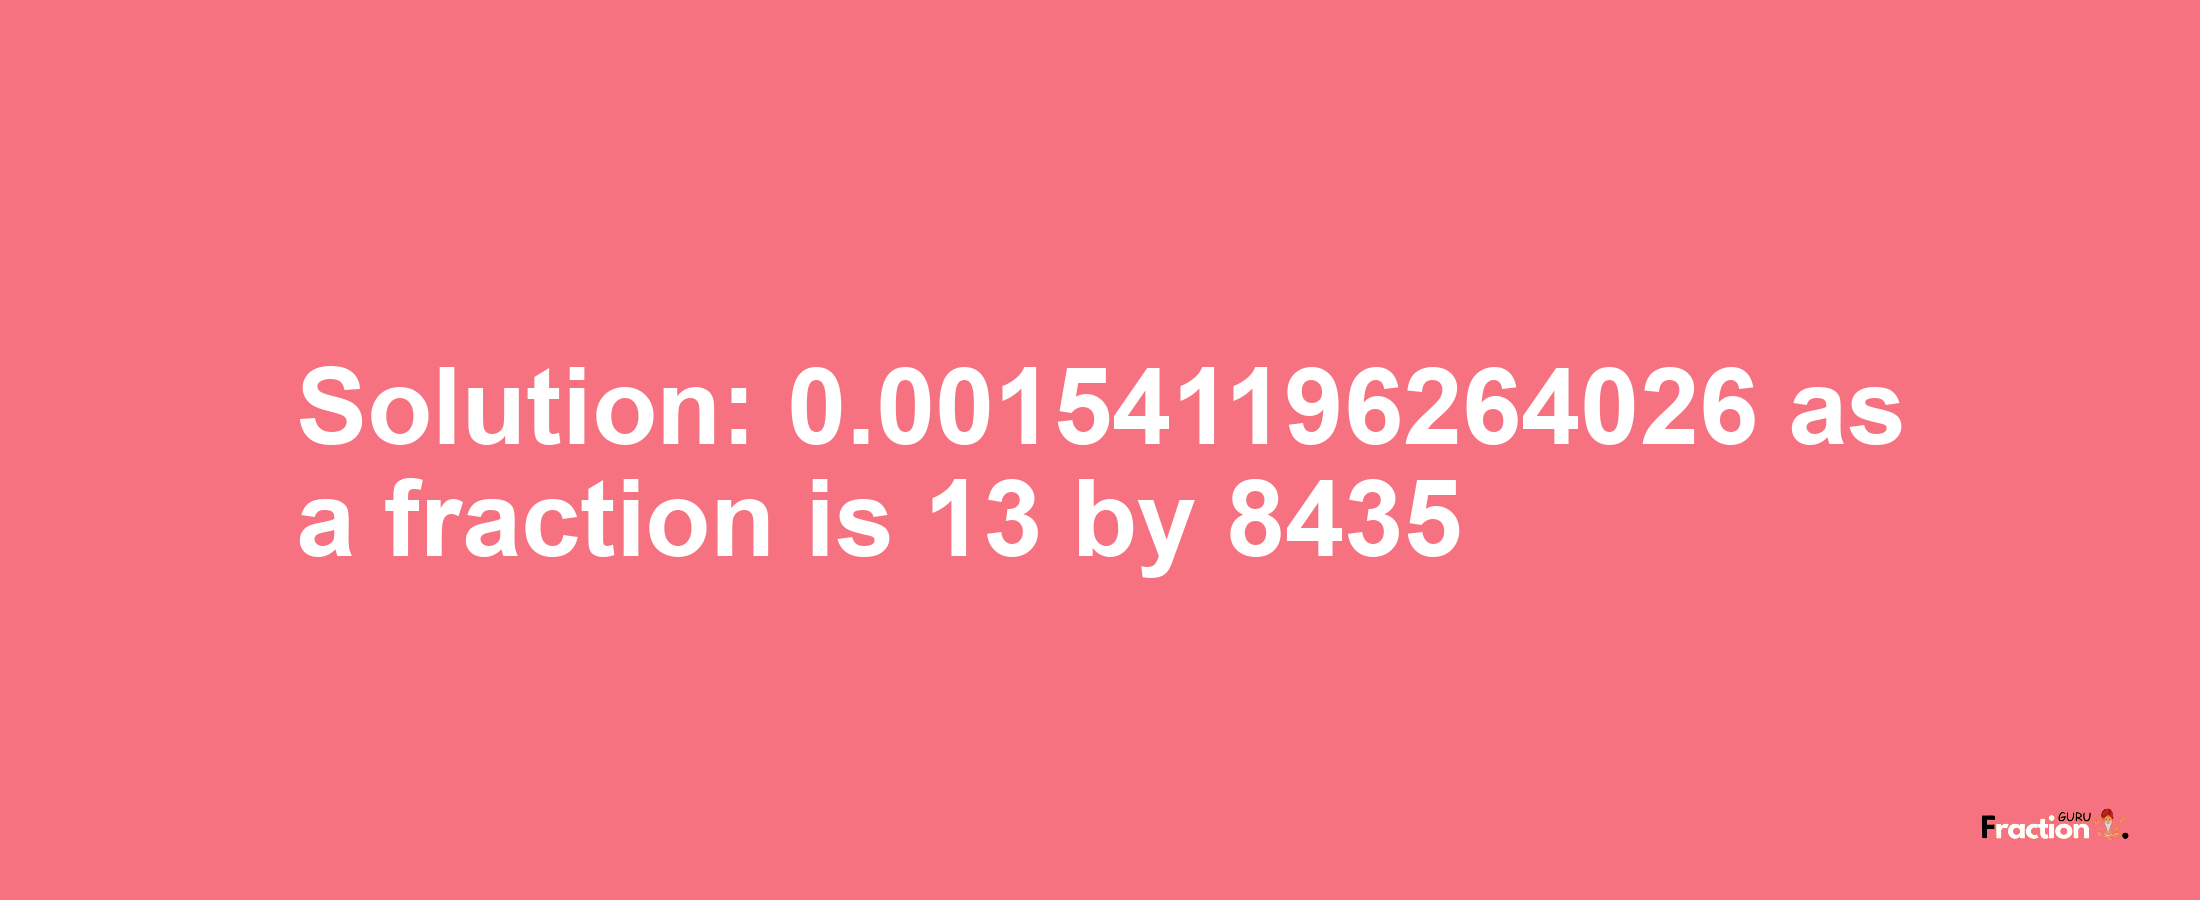 Solution:0.001541196264026 as a fraction is 13/8435